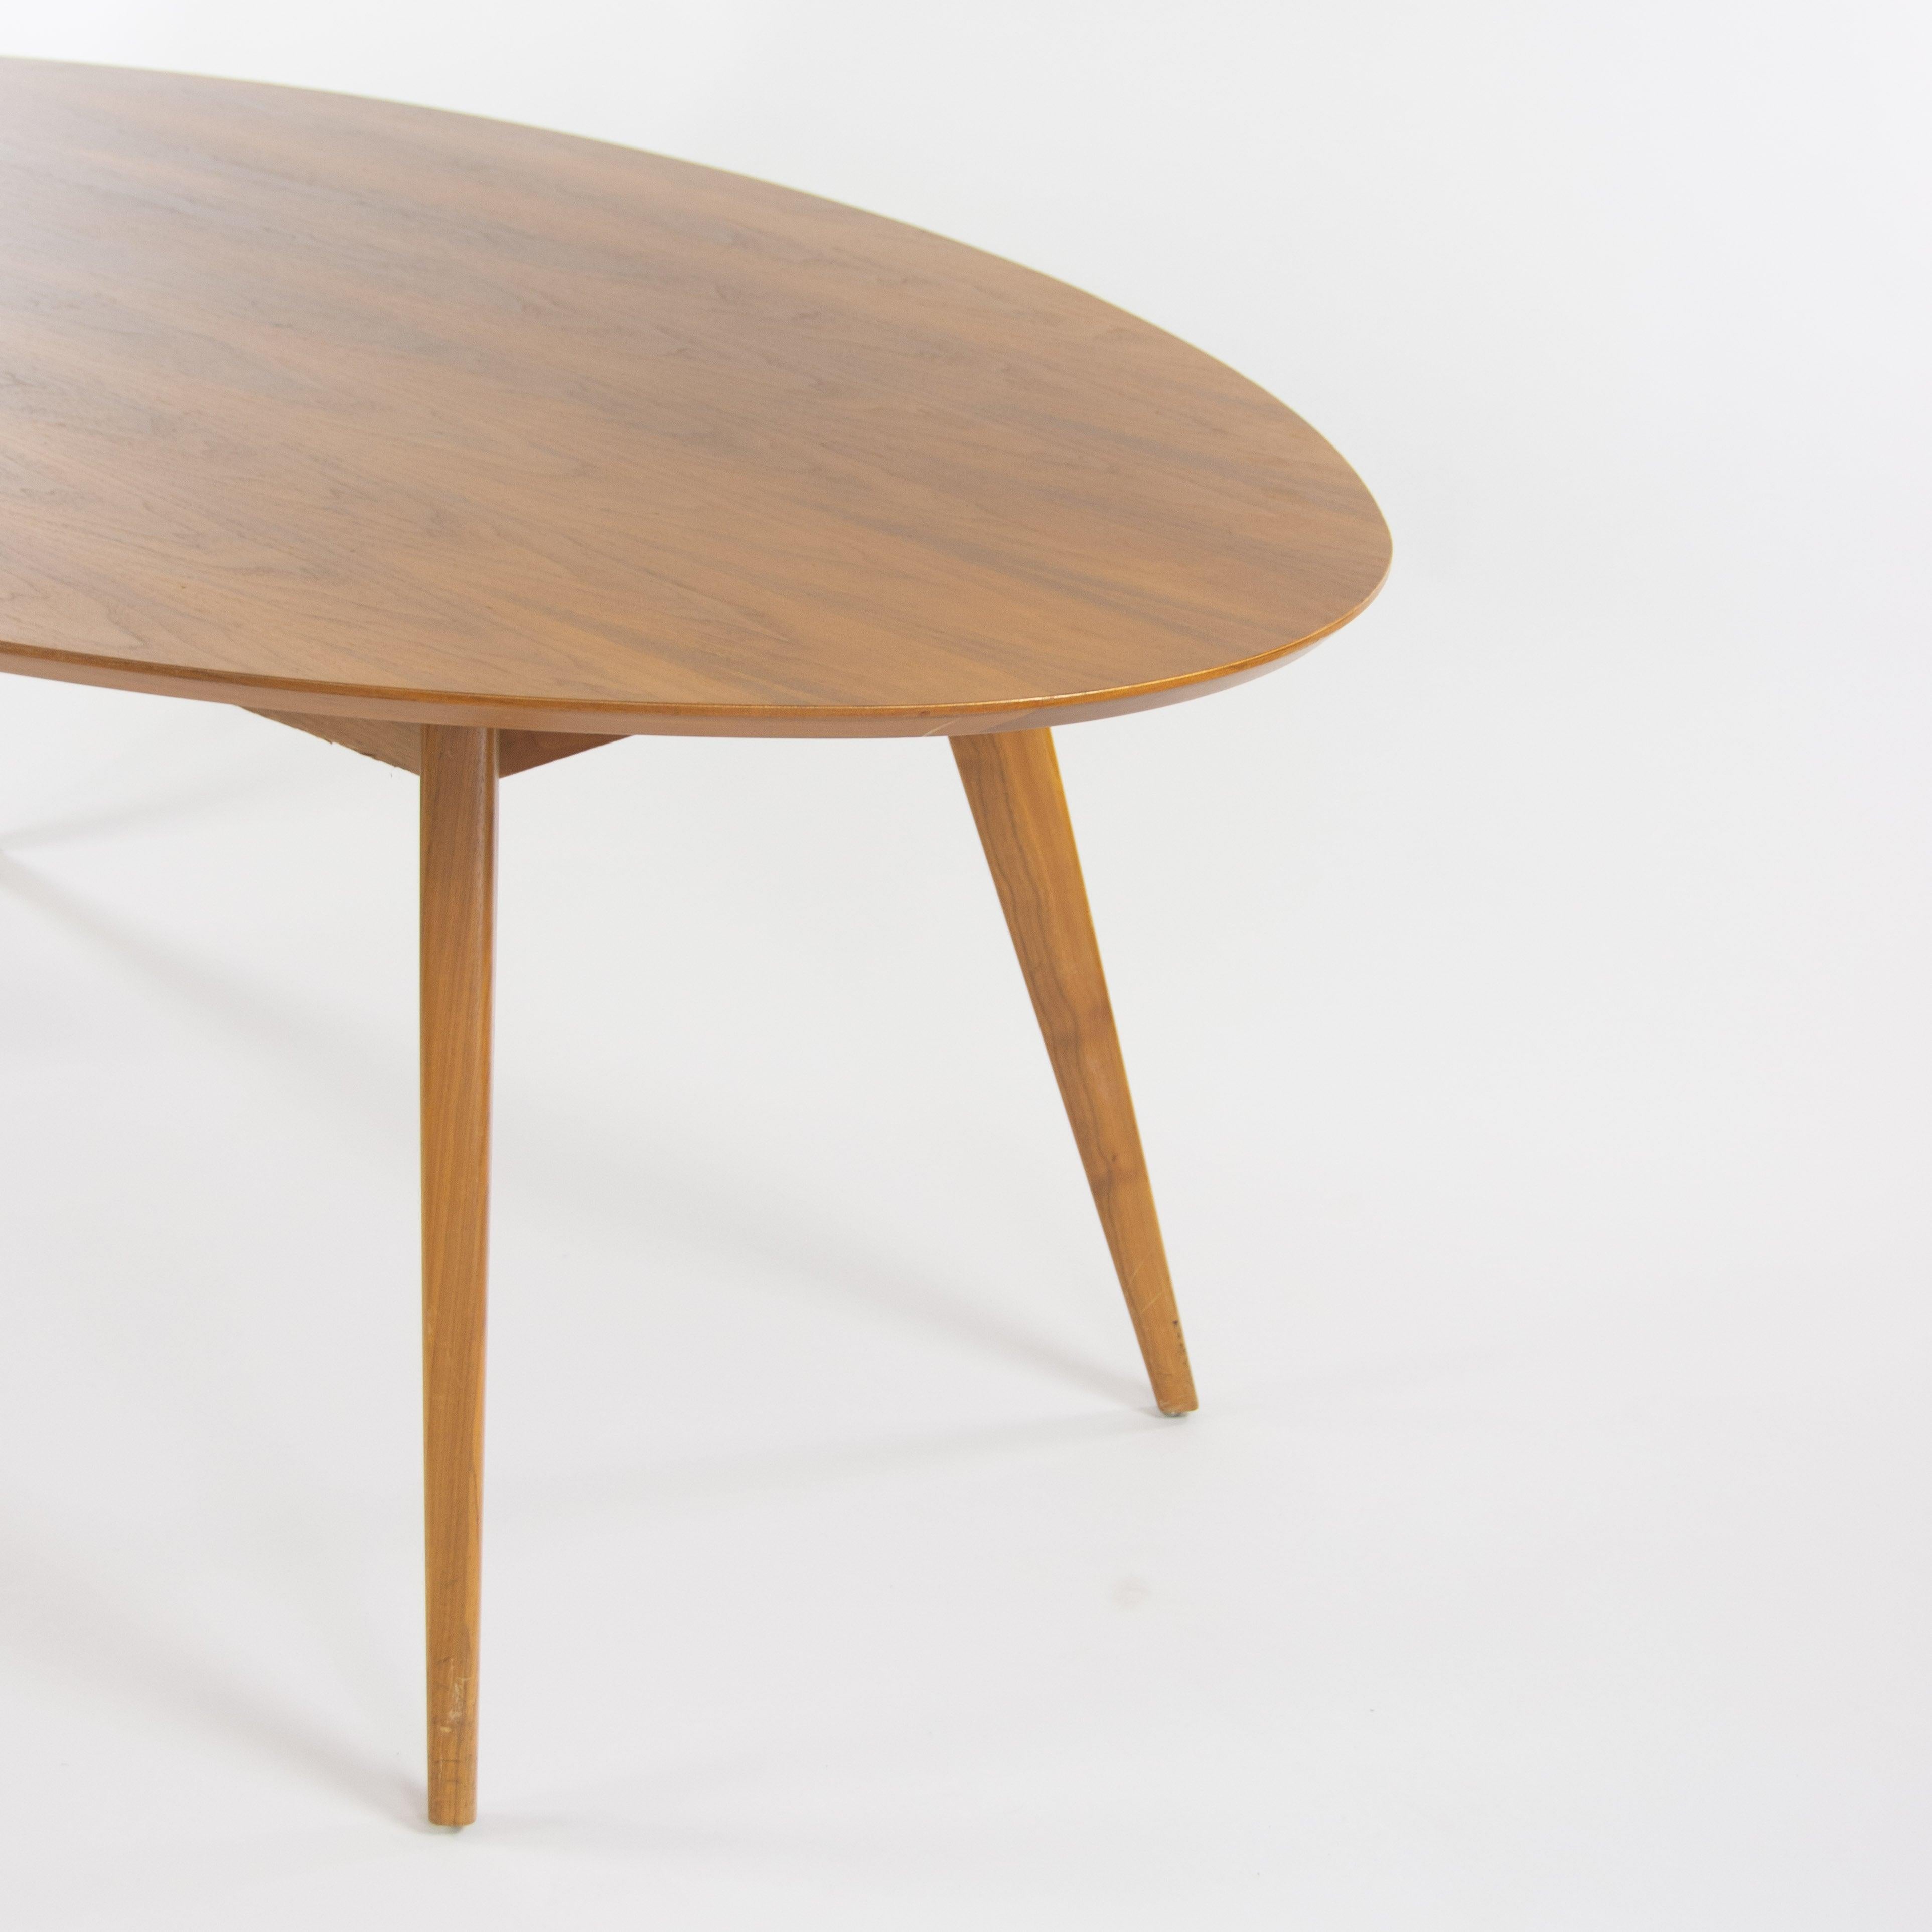 Custom Jens Risom for Knoll 78x48 inch Oval Walnut Dining / Conference Table In Good Condition For Sale In Philadelphia, PA